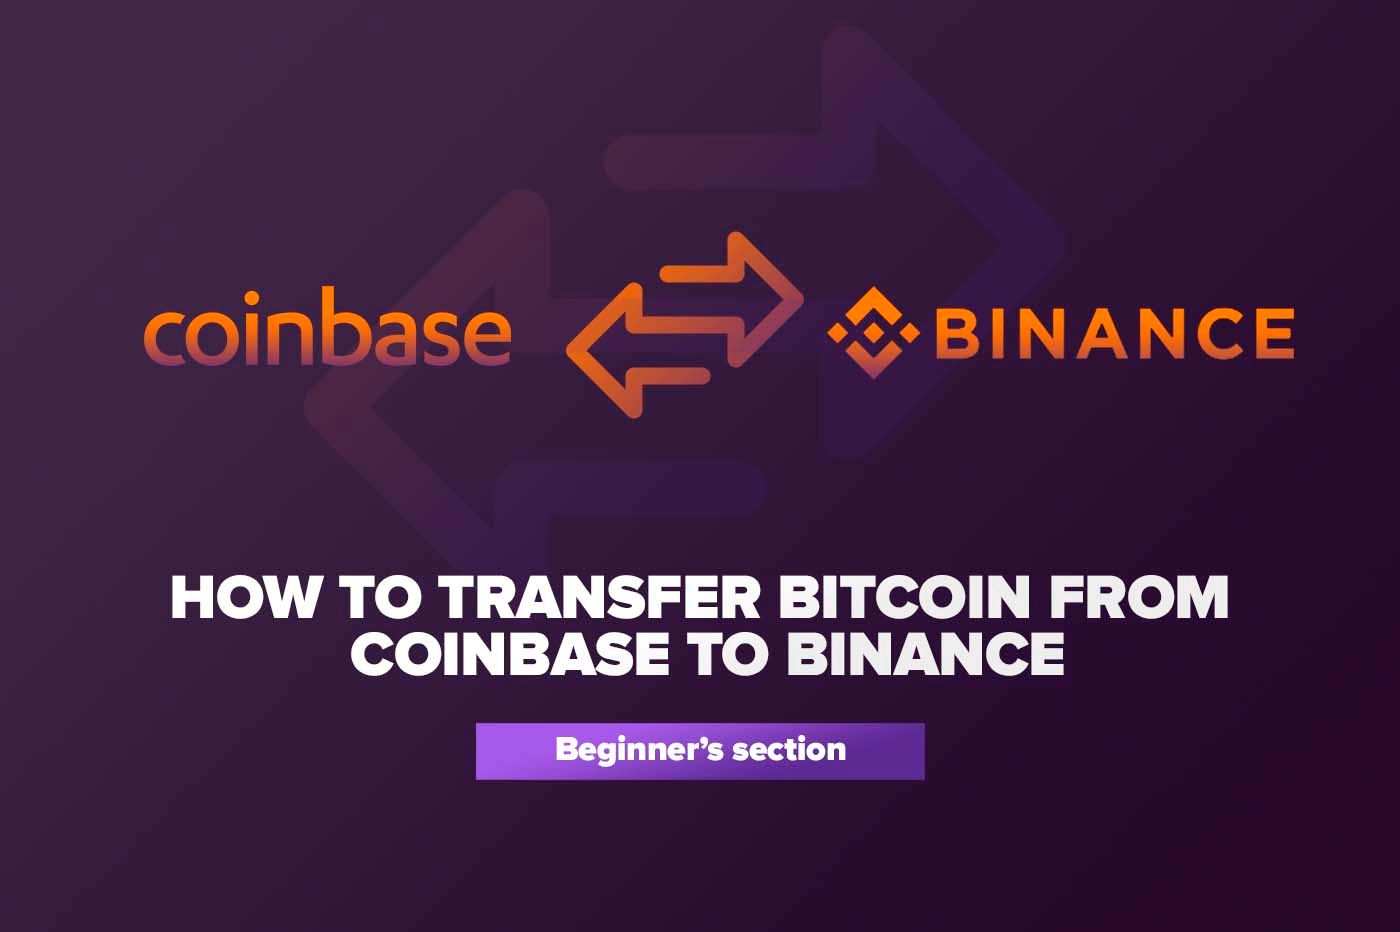 How To Transfer Bitcoin From Coinbase To Binance